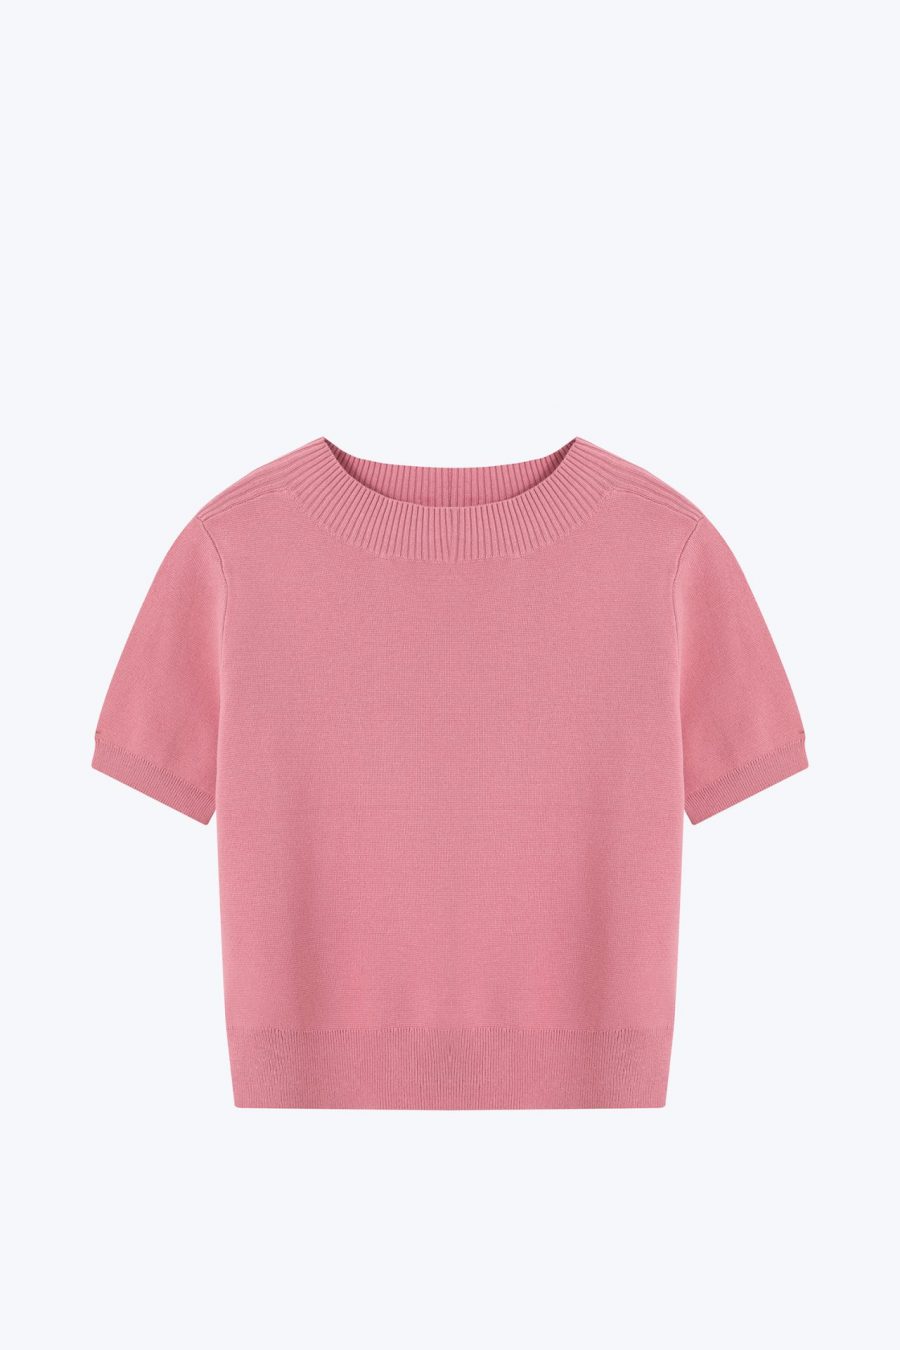 CK000966S KNITTED RIBBED COLLAR TOP BLUSH